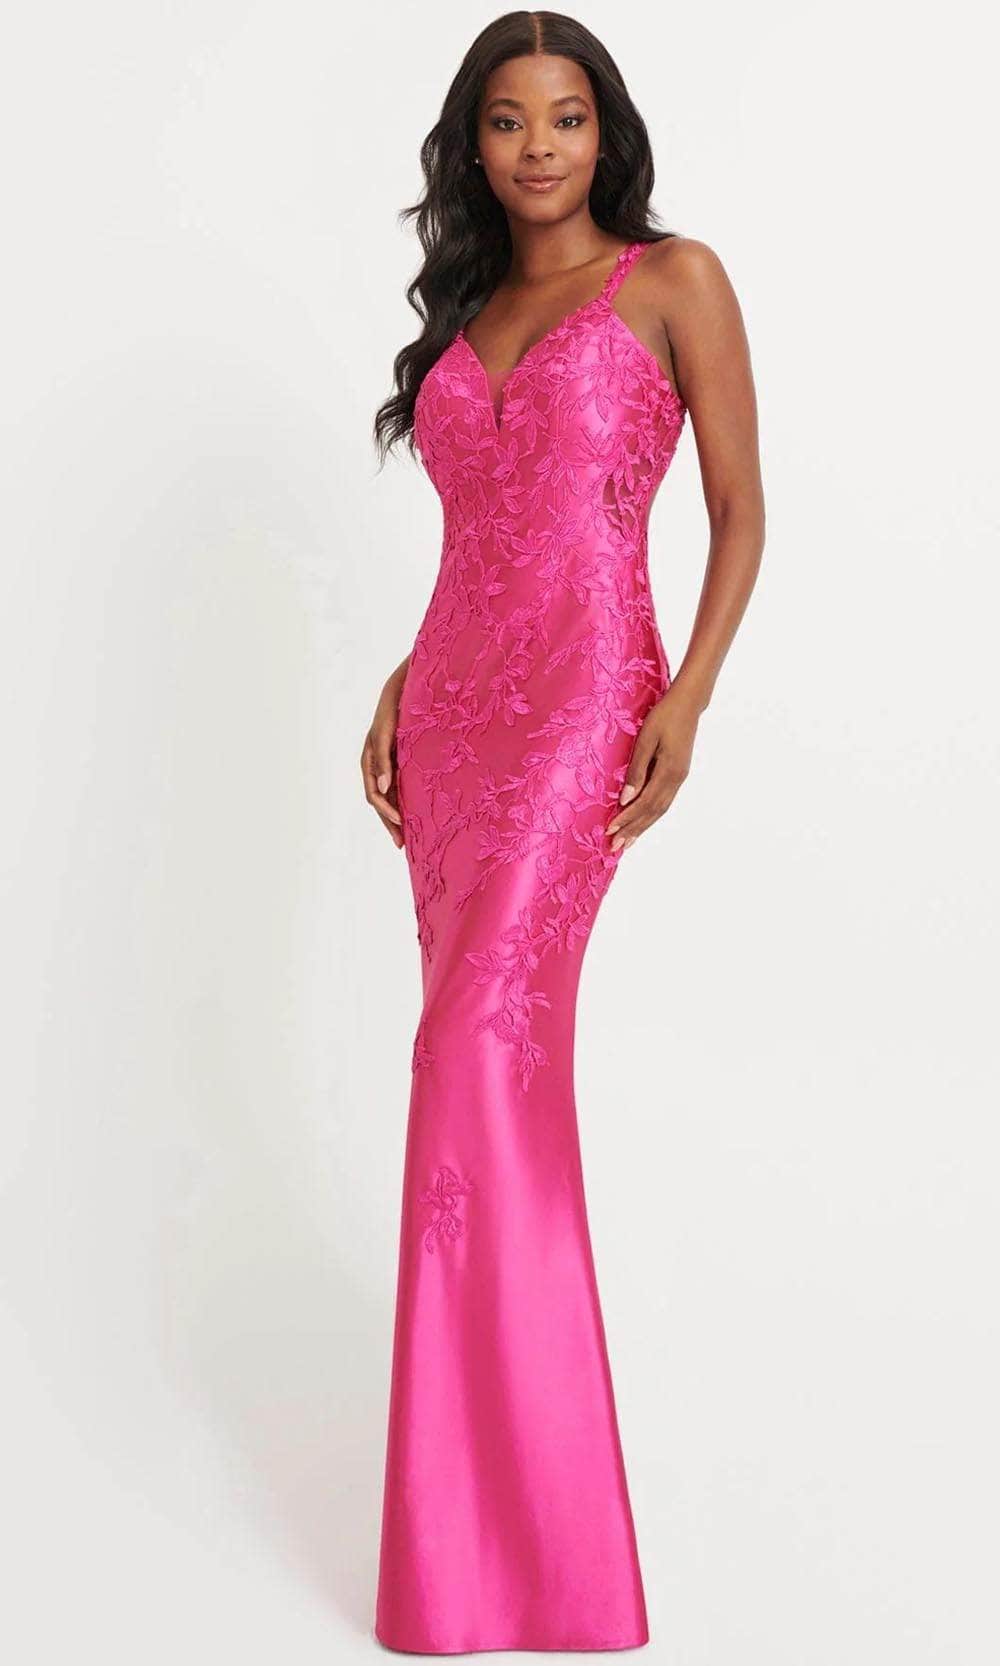 Image of Faviana 11082 - Applique Cutout Back Prom Gown